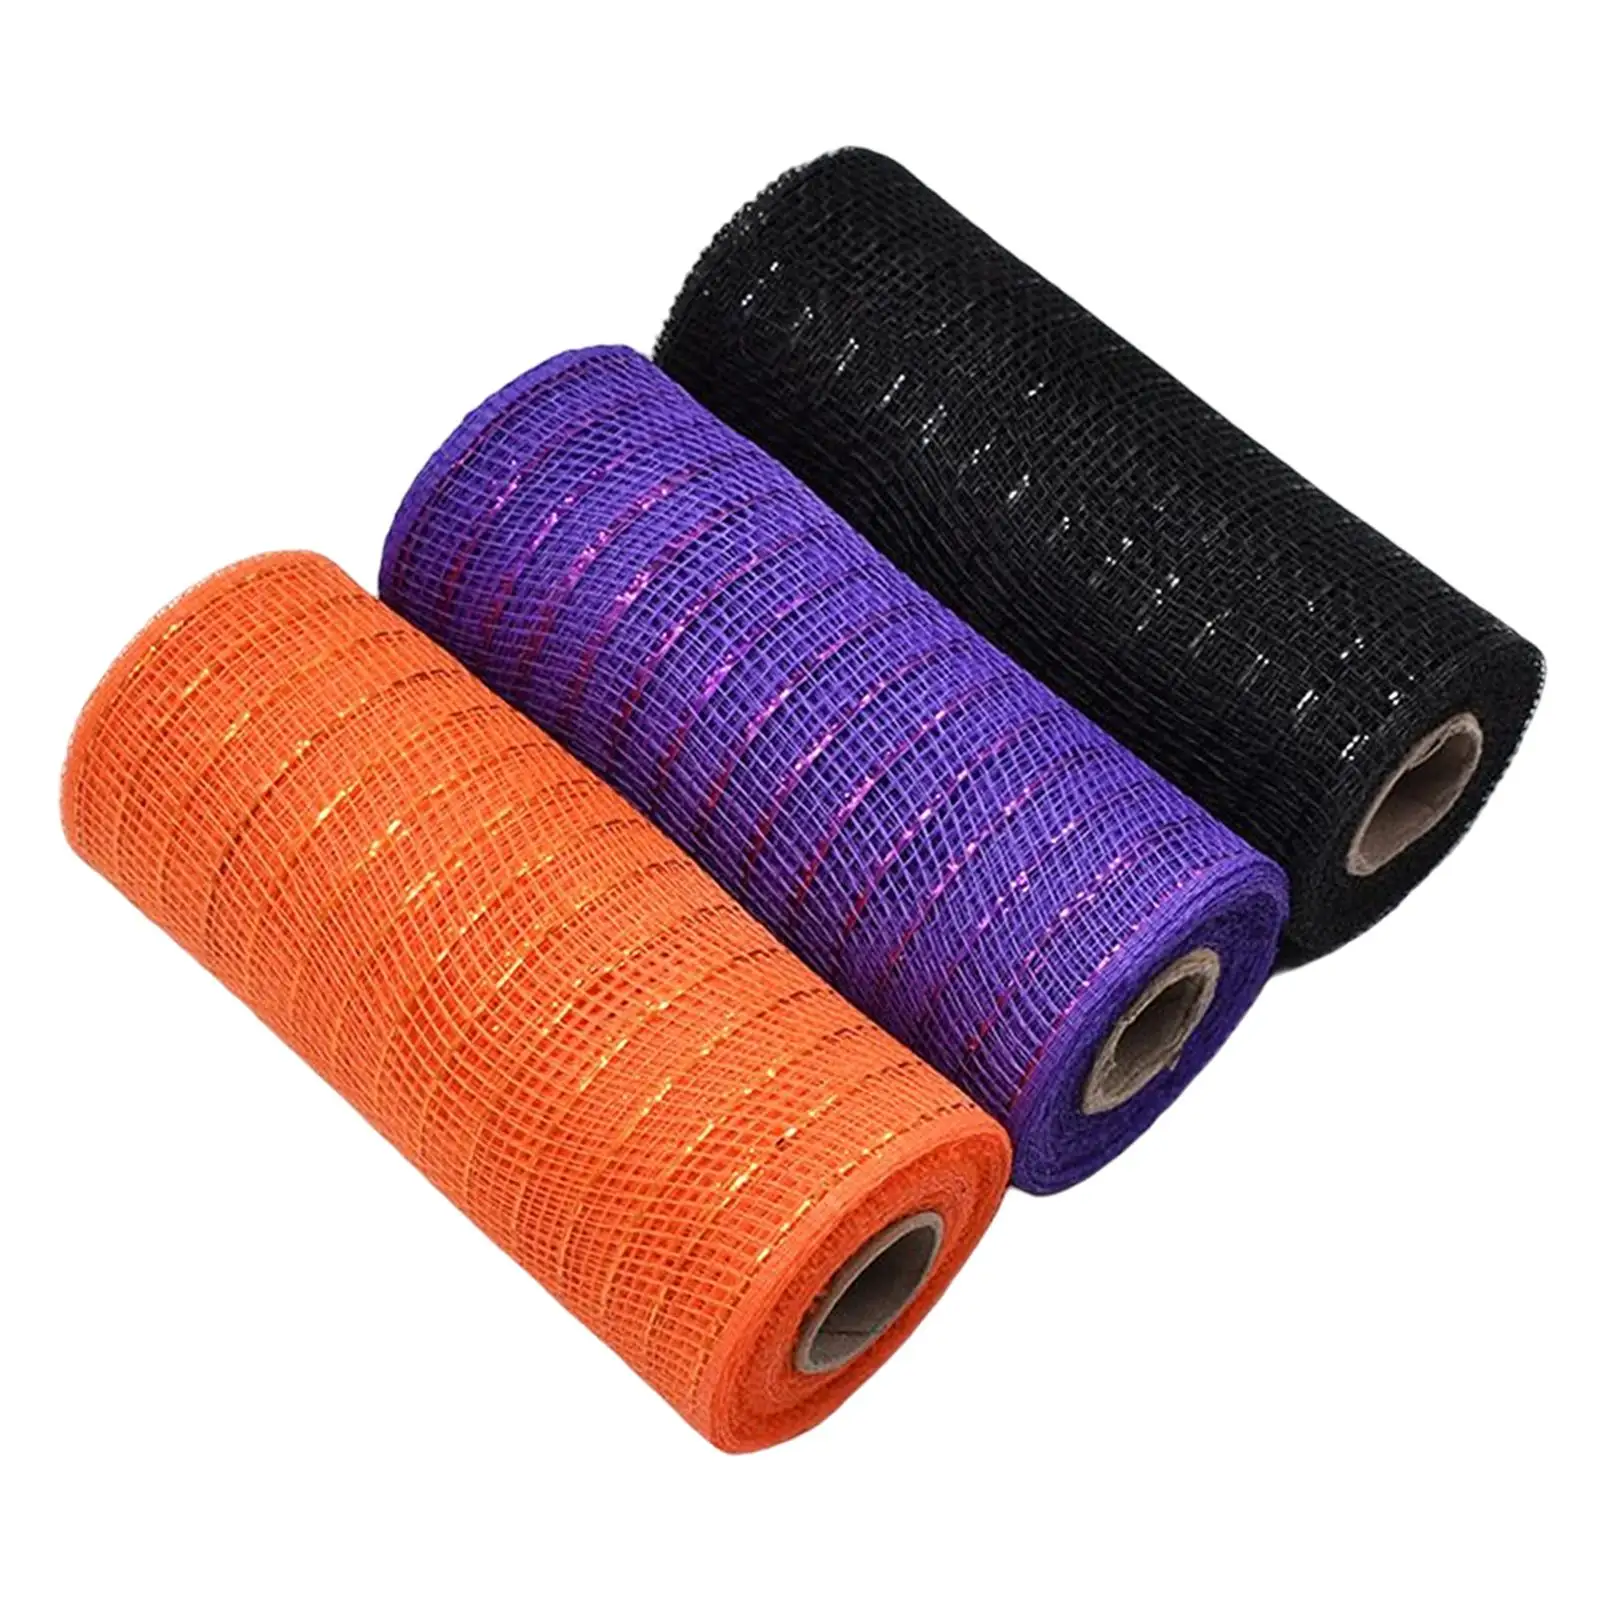 3 Rolls Poly Mesh Ribbon 6 inch Width Twist Ties Mesh Rolls for Wreaths Gift Wrapping Bows Home Decor Autumn Fall Ribbon